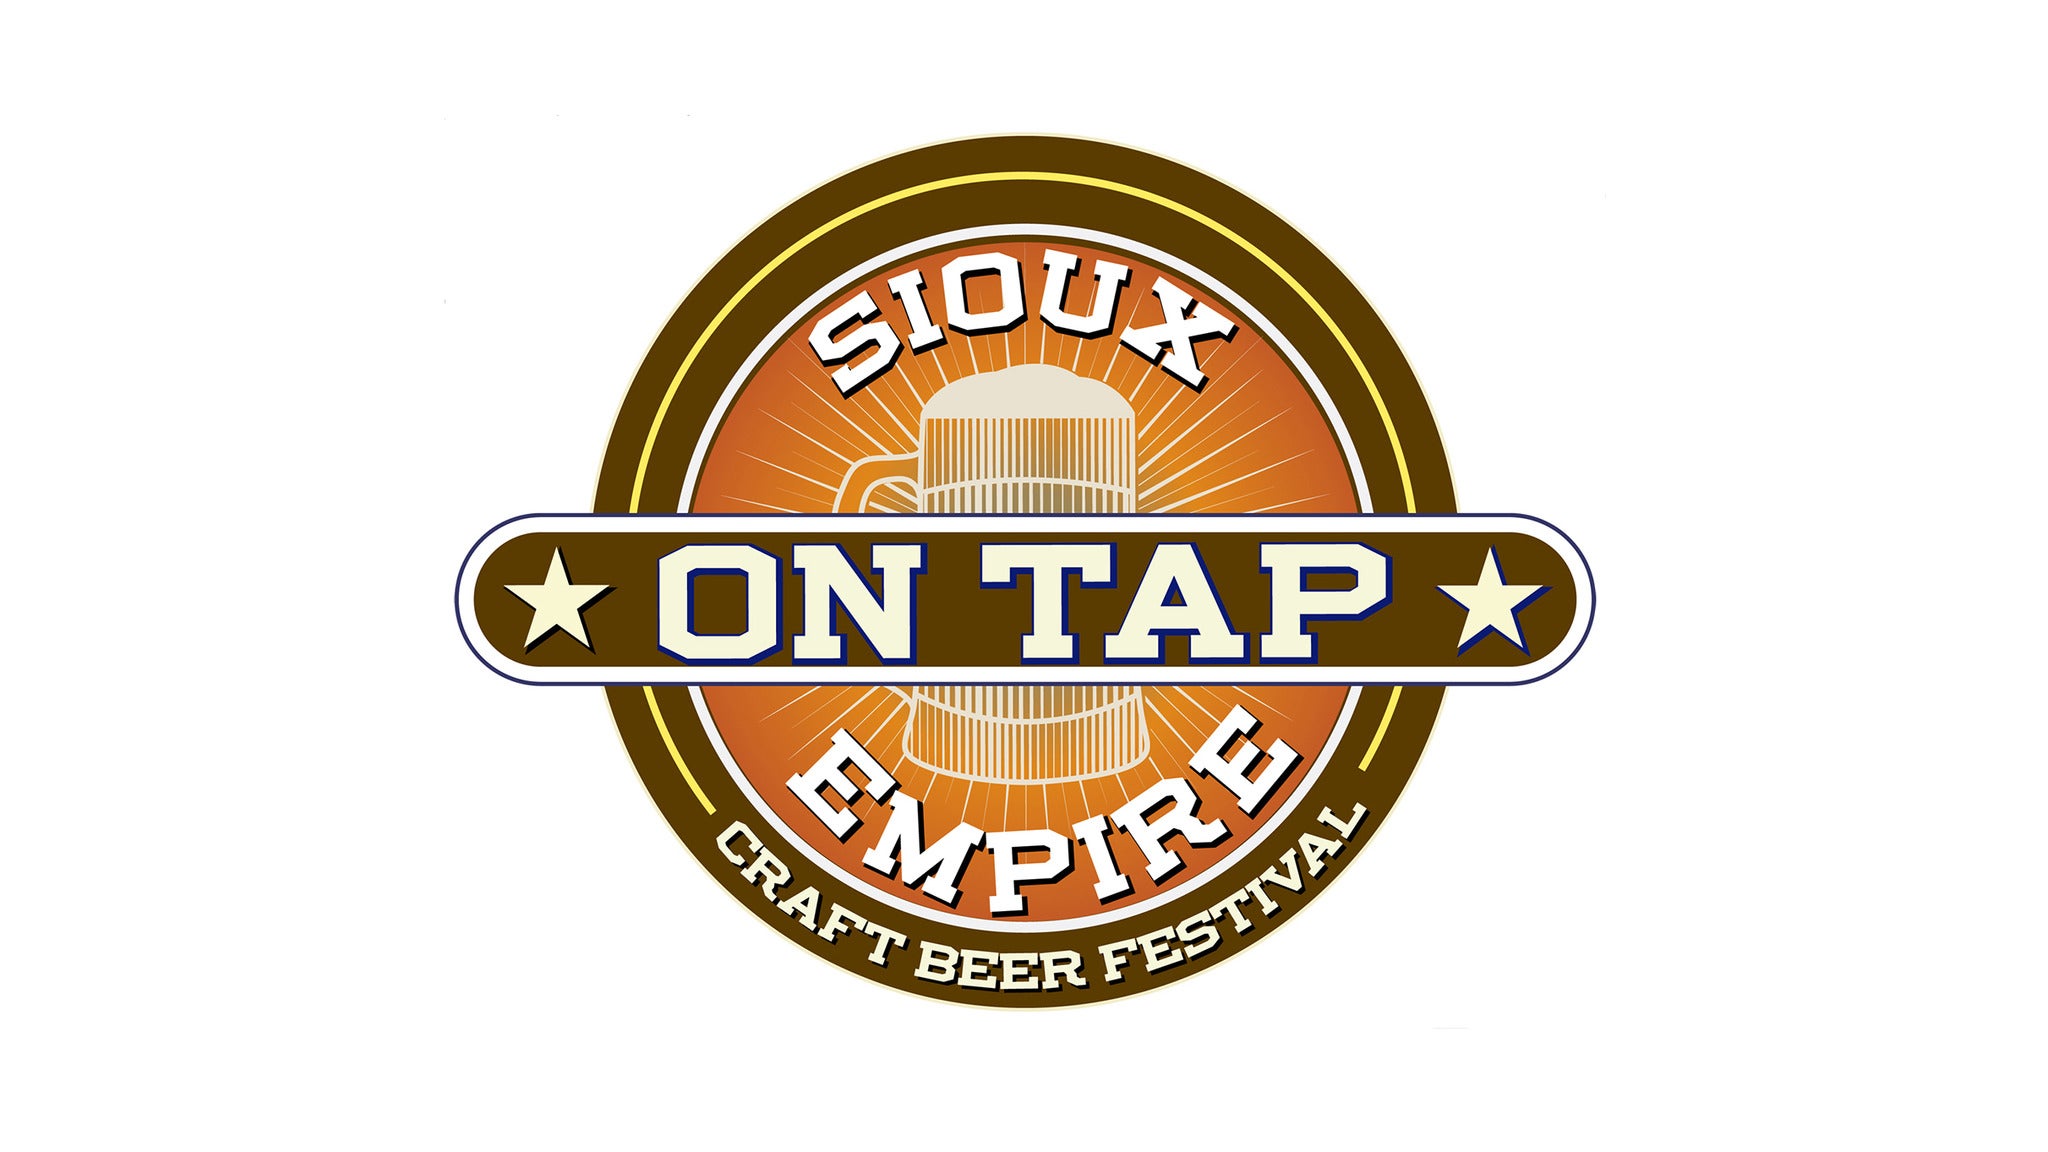 Sioux Empire On Tap in Sioux Falls promo photo for Exclusive presale offer code